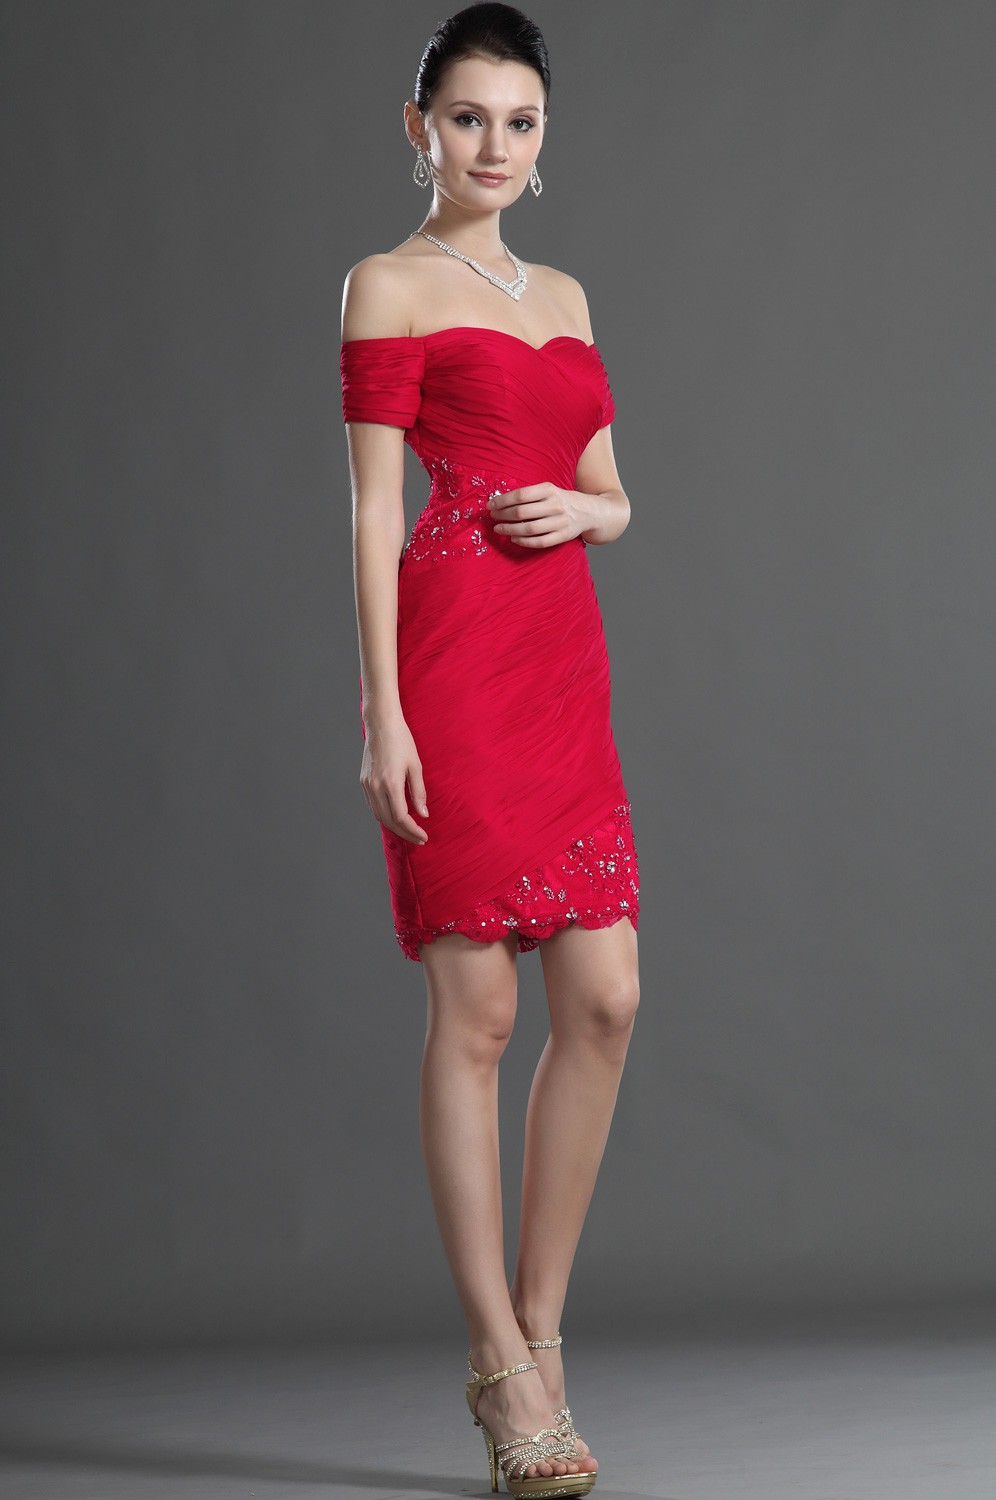 Red Cocktail Dress | Dressed Up Girl